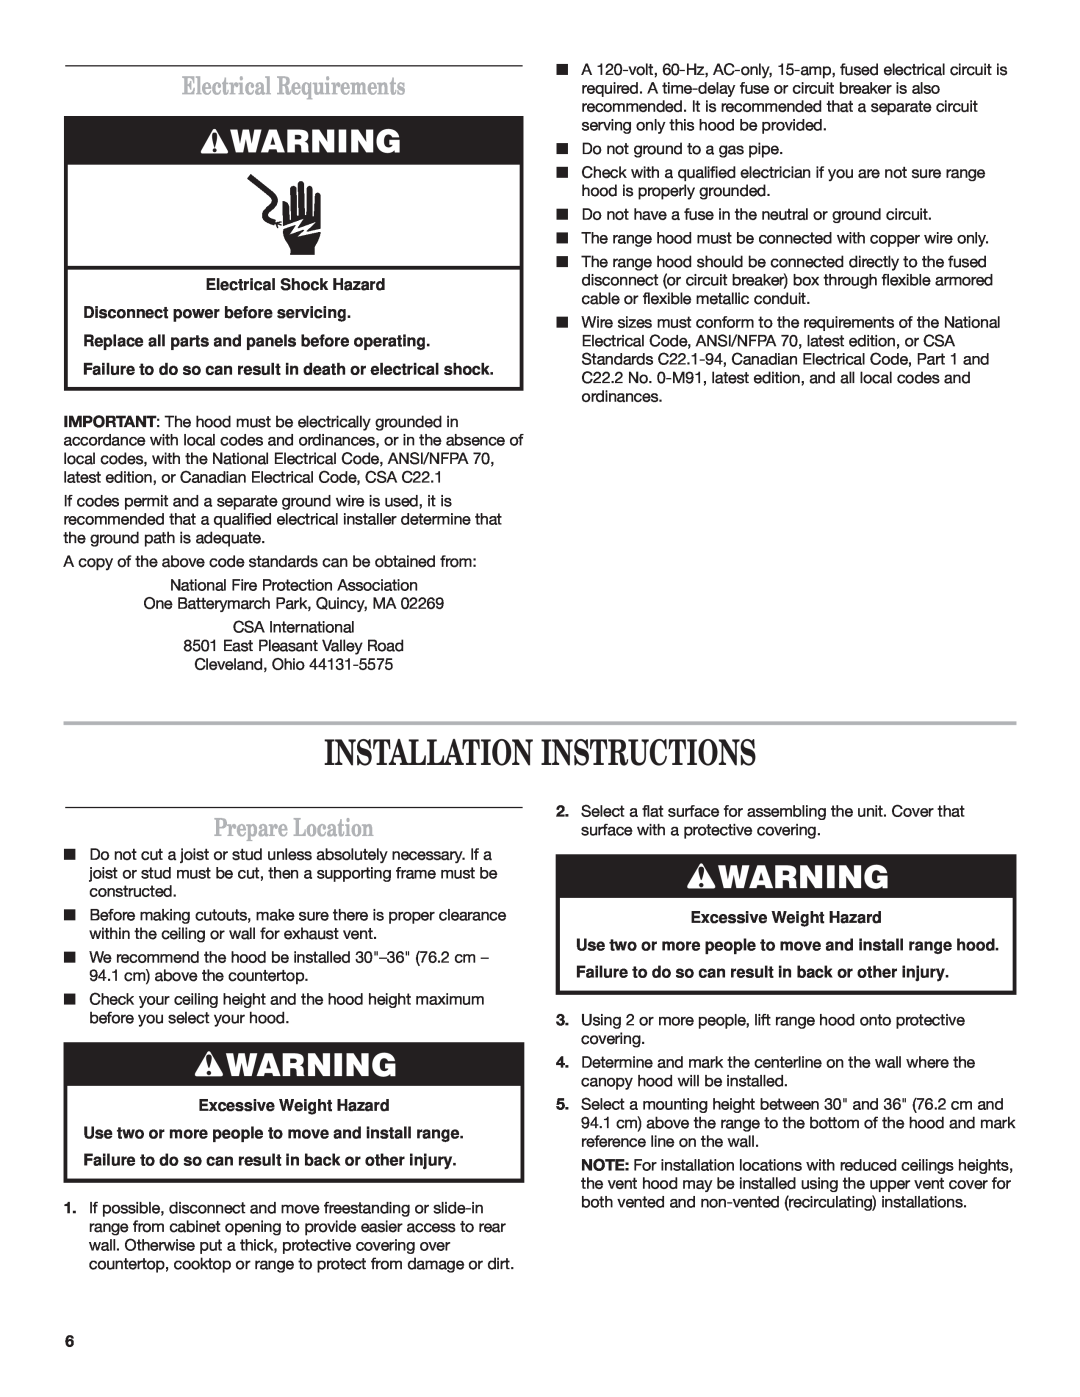 Whirlpool 9760266 Installation Instructions, Electrical Requirements, Prepare Location, Excessive Weight Hazard 